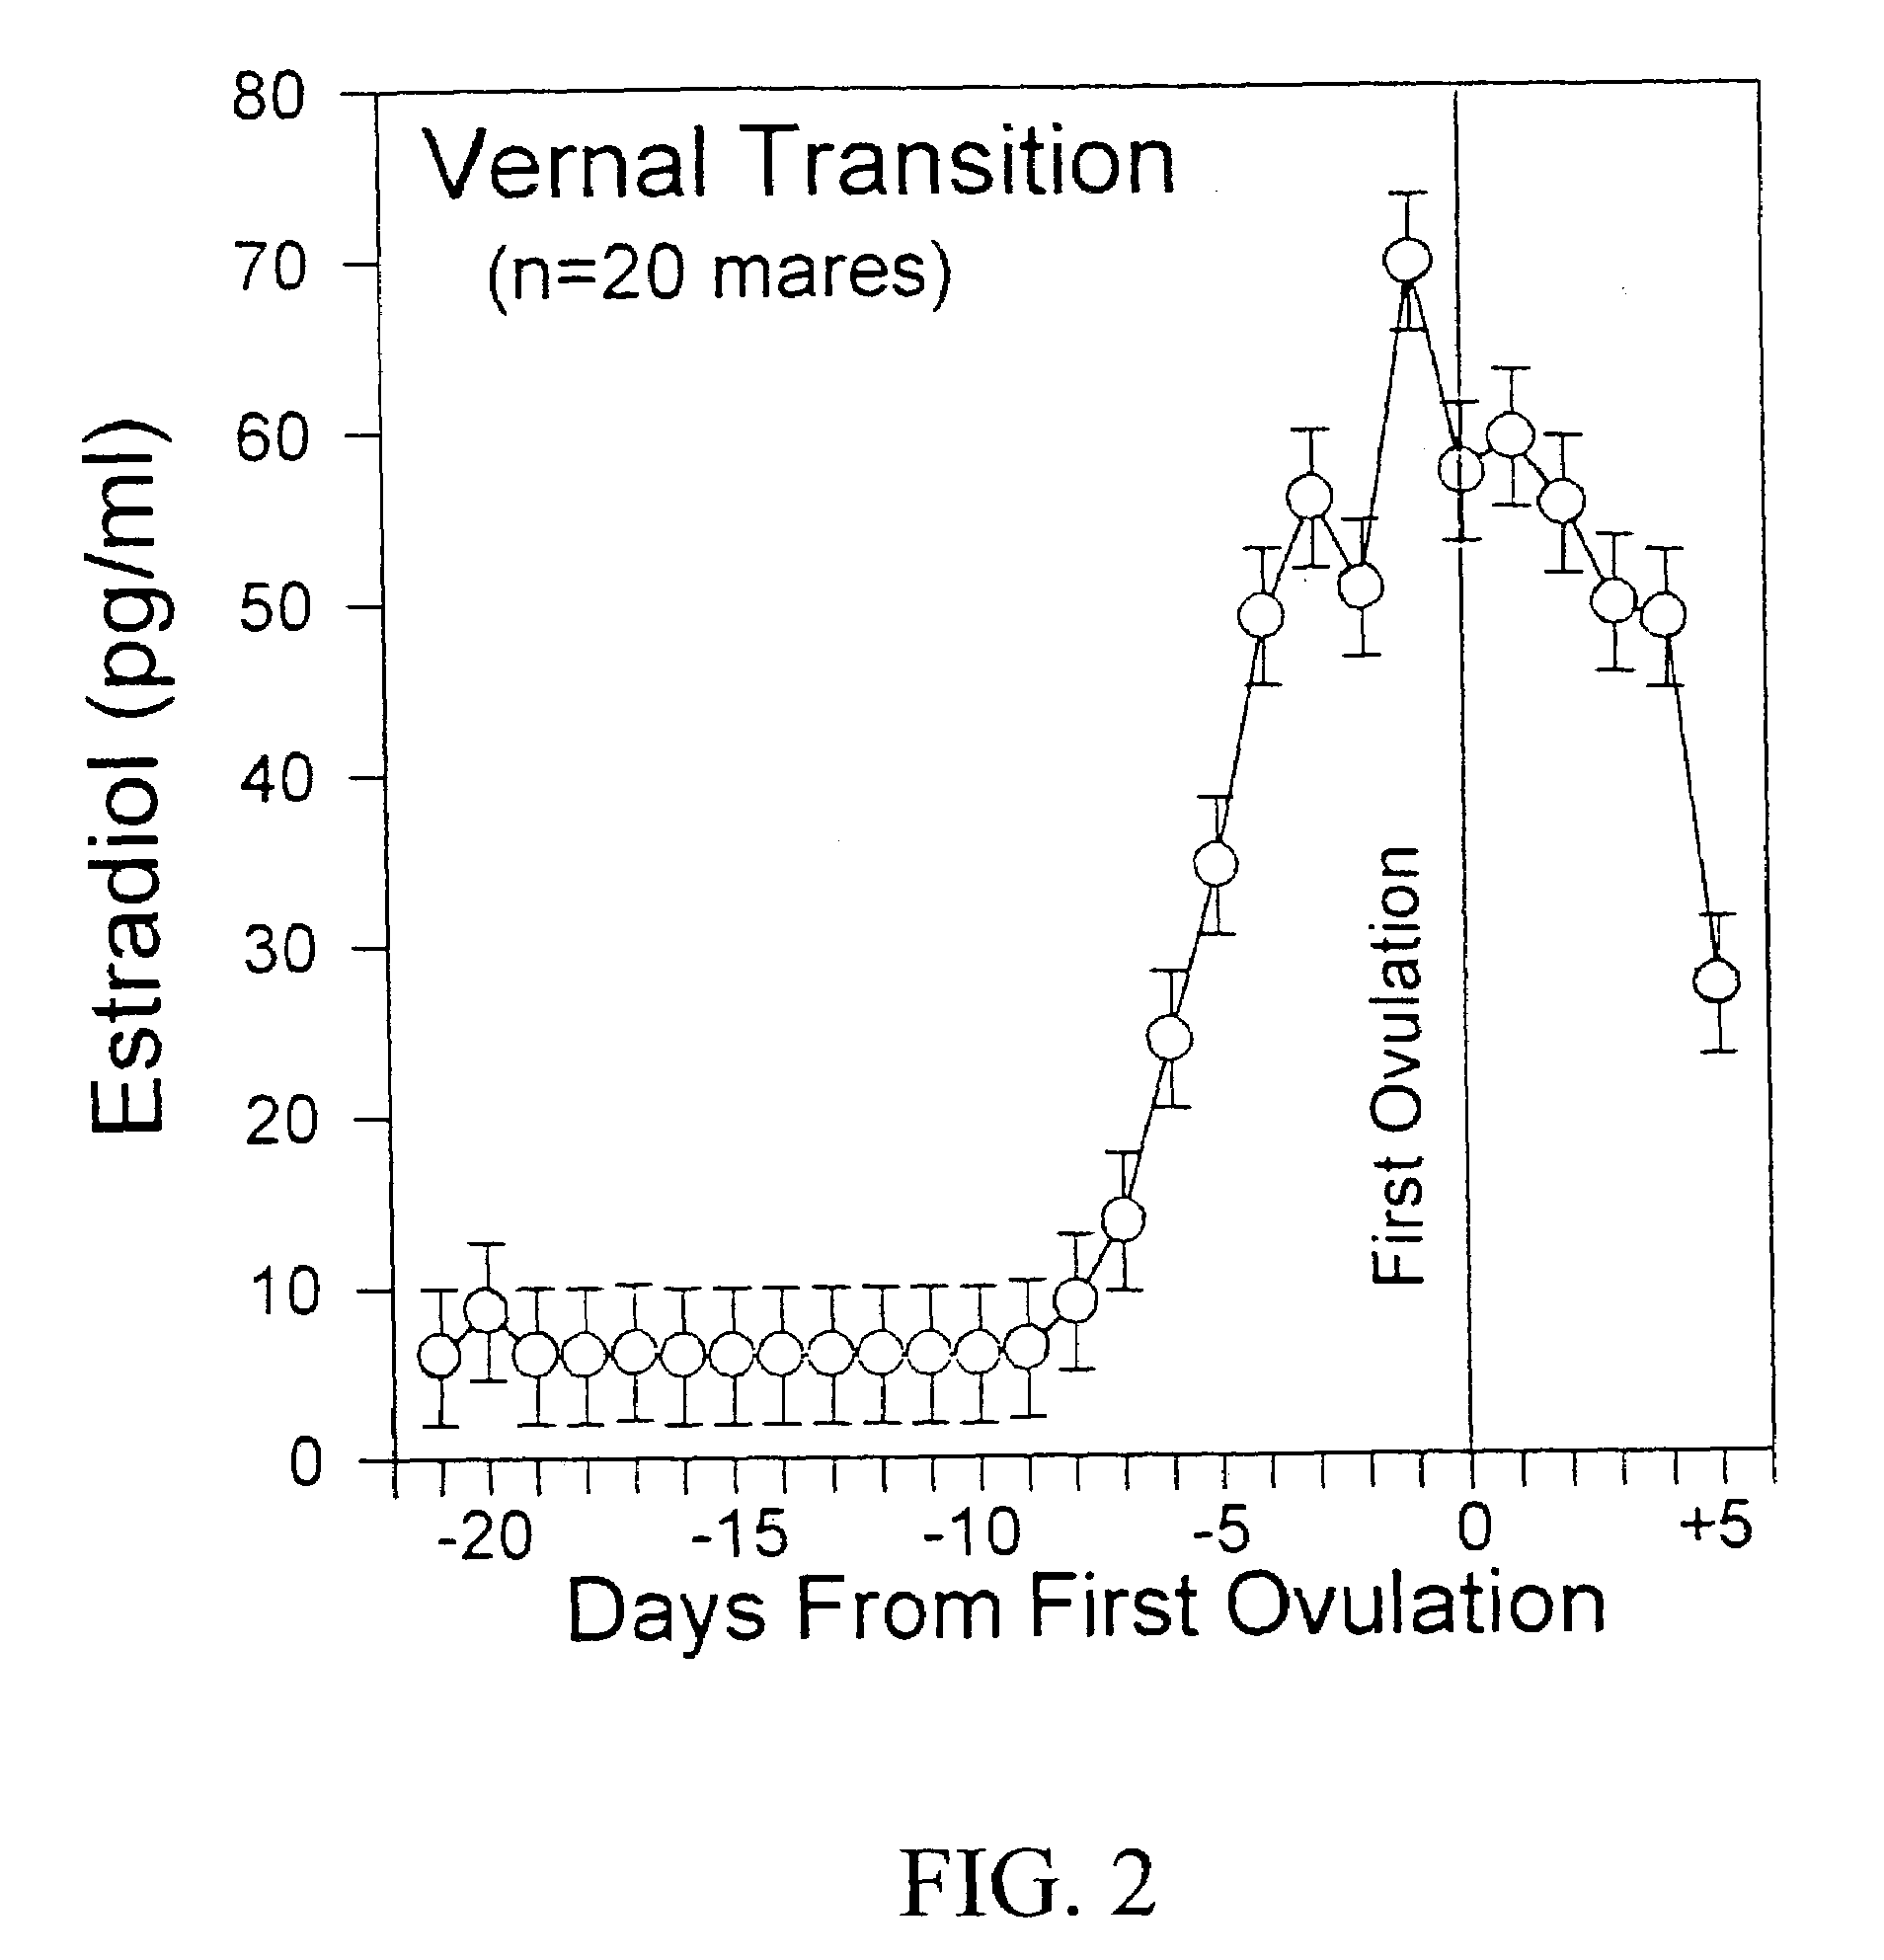 Materials and methods for detection and quantitation of an analyte